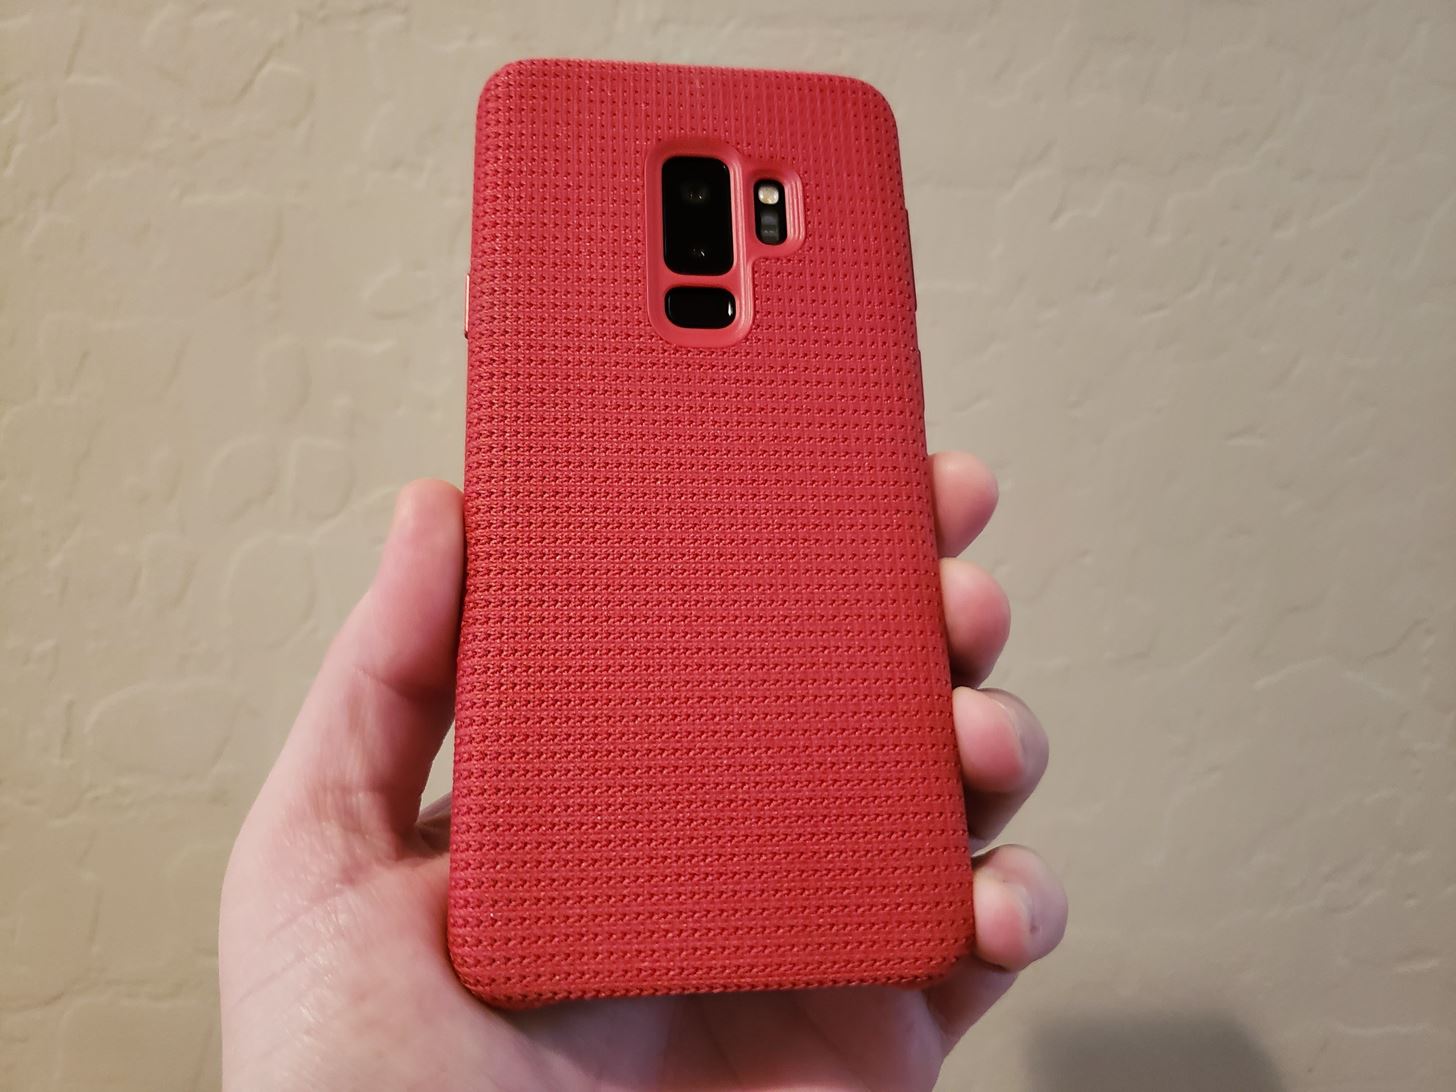 Hands-on with Samsung's Official OEM Cases for the Galaxy S9